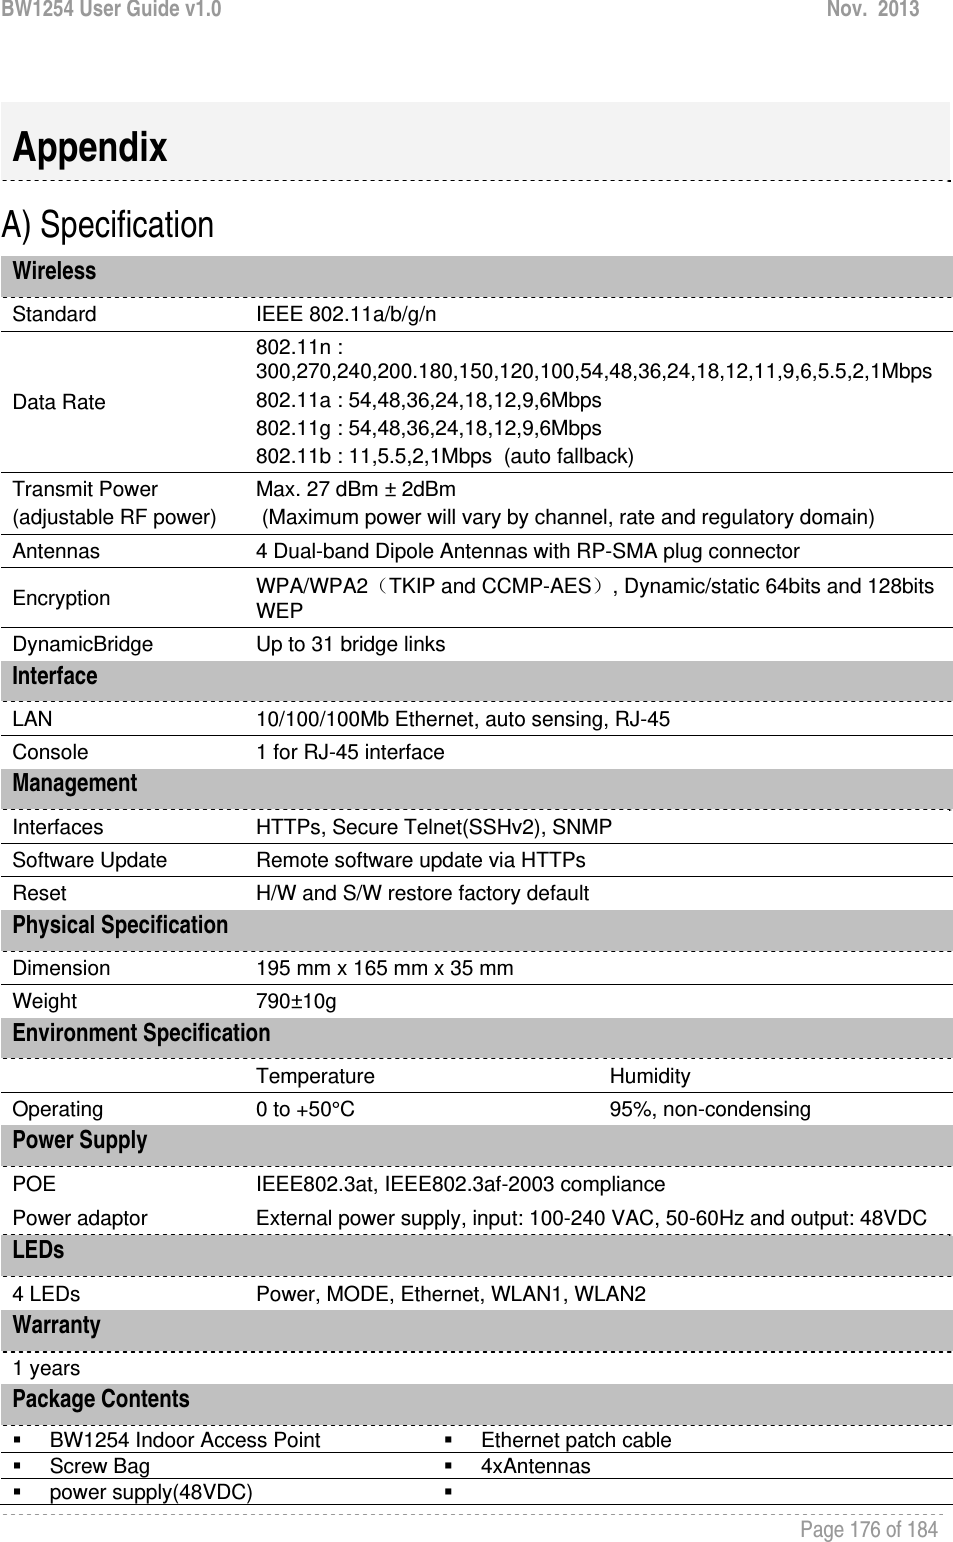 BW1254 User Guide v1.0  Nov.  2013     Page 176 of 184    A) Specification Wireless Standard  IEEE 802.11a/b/g/n Data Rate 802.11n : 300,270,240,200.180,150,120,100,54,48,36,24,18,12,11,9,6,5.5,2,1Mbps 802.11a : 54,48,36,24,18,12,9,6Mbps 802.11g : 54,48,36,24,18,12,9,6Mbps 802.11b : 11,5.5,2,1Mbps  (auto fallback) Transmit Power (adjustable RF power) Max. 27 dBm ± 2dBm  (Maximum power will vary by channel, rate and regulatory domain) Antennas  4 Dual-band Dipole Antennas with RP-SMA plug connector Encryption  WPA/WPA2（TKIP and CCMP-AES）, Dynamic/static 64bits and 128bits WEP DynamicBridge   Up to 31 bridge links Interface LAN  10/100/100Mb Ethernet, auto sensing, RJ-45 Console  1 for RJ-45 interface Management Interfaces  HTTPs, Secure Telnet(SSHv2), SNMP Software Update  Remote software update via HTTPs Reset  H/W and S/W restore factory default Physical Specification Dimension   195 mm x 165 mm x 35 mm  Weight  790±10g Environment Specification  Temperature  Humidity Operating  0 to +50°C  95%, non-condensing Power Supply POE  IEEE802.3at, IEEE802.3af-2003 compliance Power adaptor  External power supply, input: 100-240 VAC, 50-60Hz and output: 48VDC LEDs 4 LEDs  Power, MODE, Ethernet, WLAN1, WLAN2  Warranty 1 years Package Contents     BW1254 Indoor Access Point    Ethernet patch cable  Screw Bag   4xAntennas  power supply(48VDC)    Appendix 